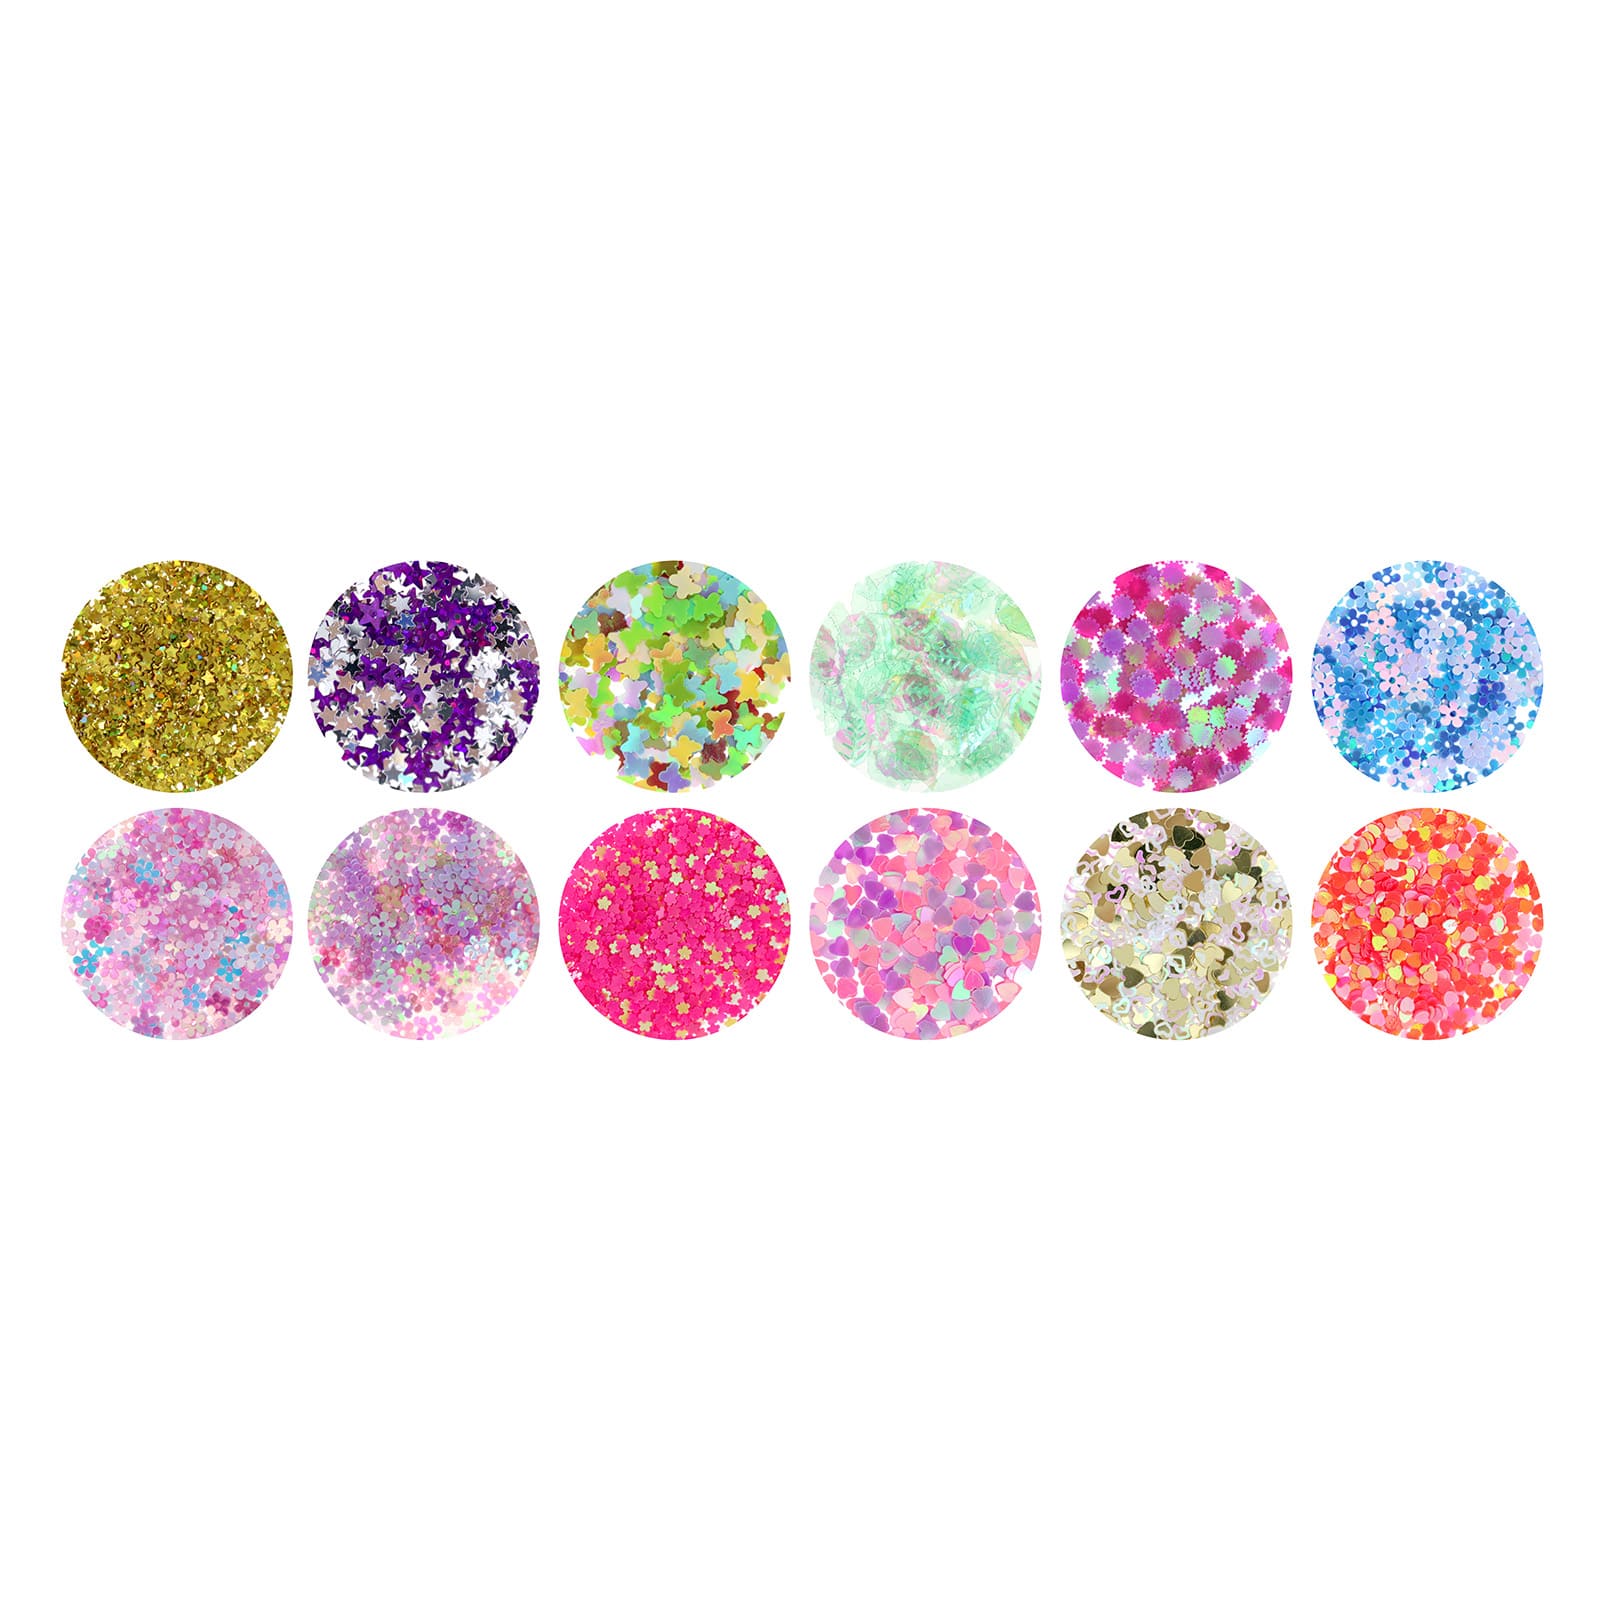 12 Packs: 12 ct. (144 total) Shaped Glitter Pack by Creatology&#x2122;